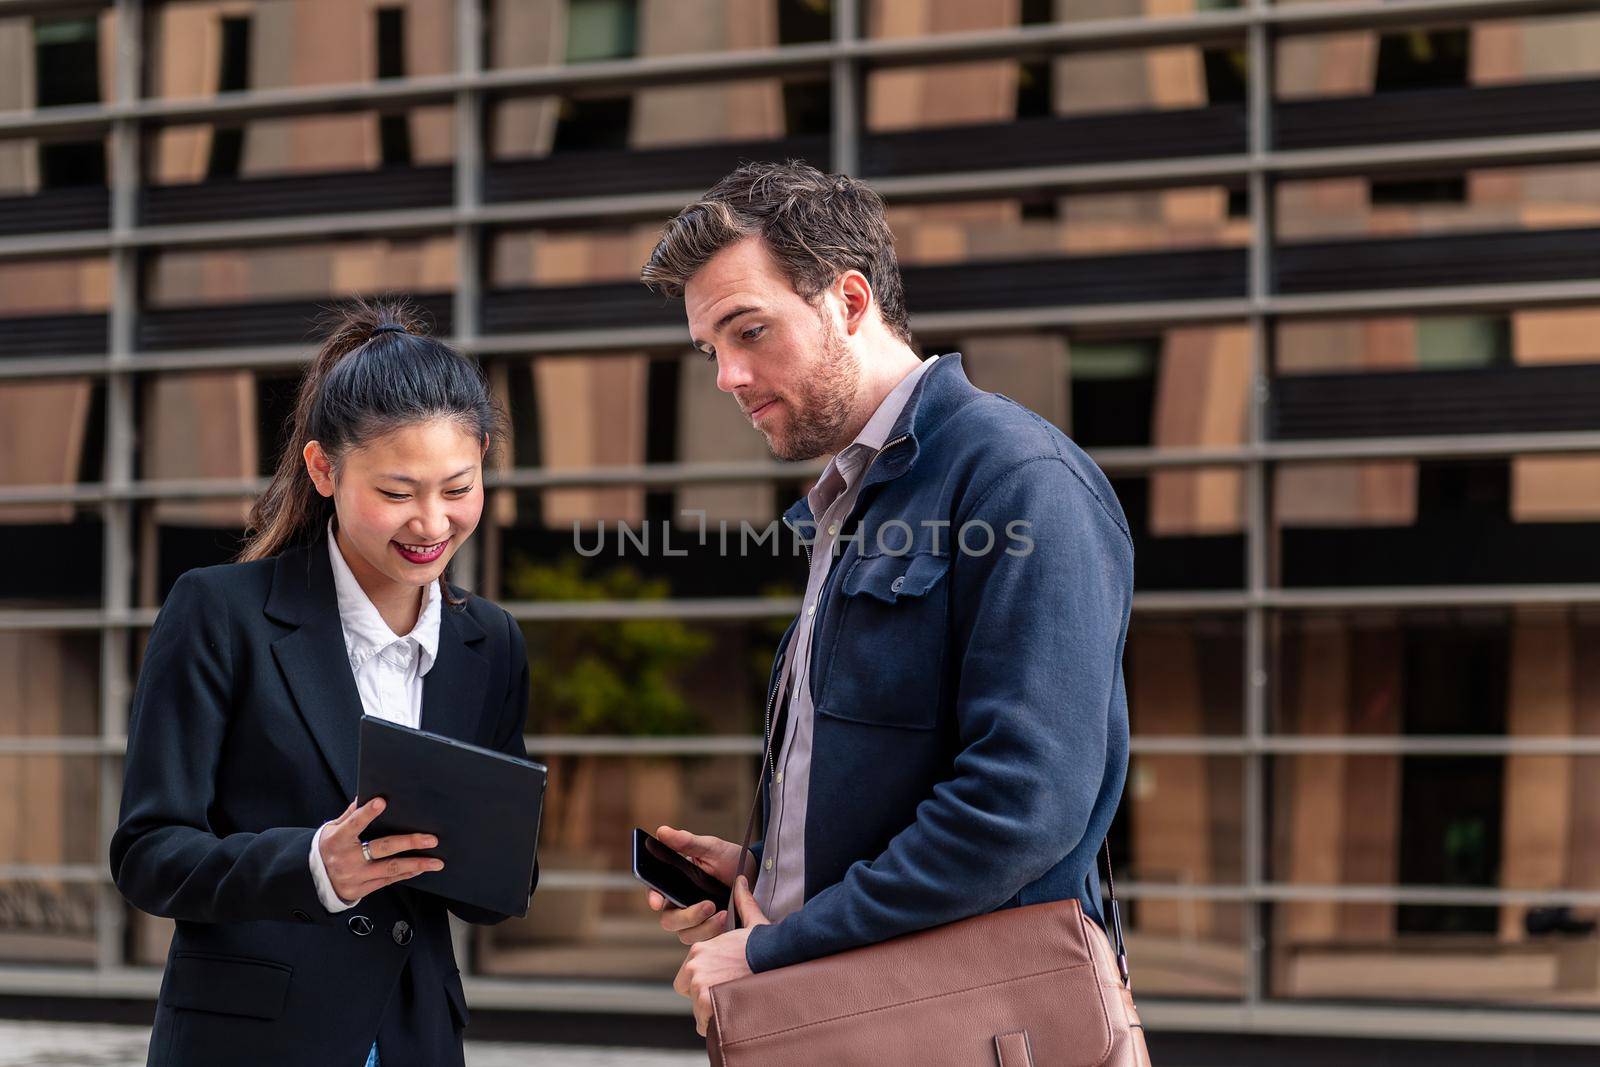 young businesswoman shows tablet to a businessman by raulmelldo